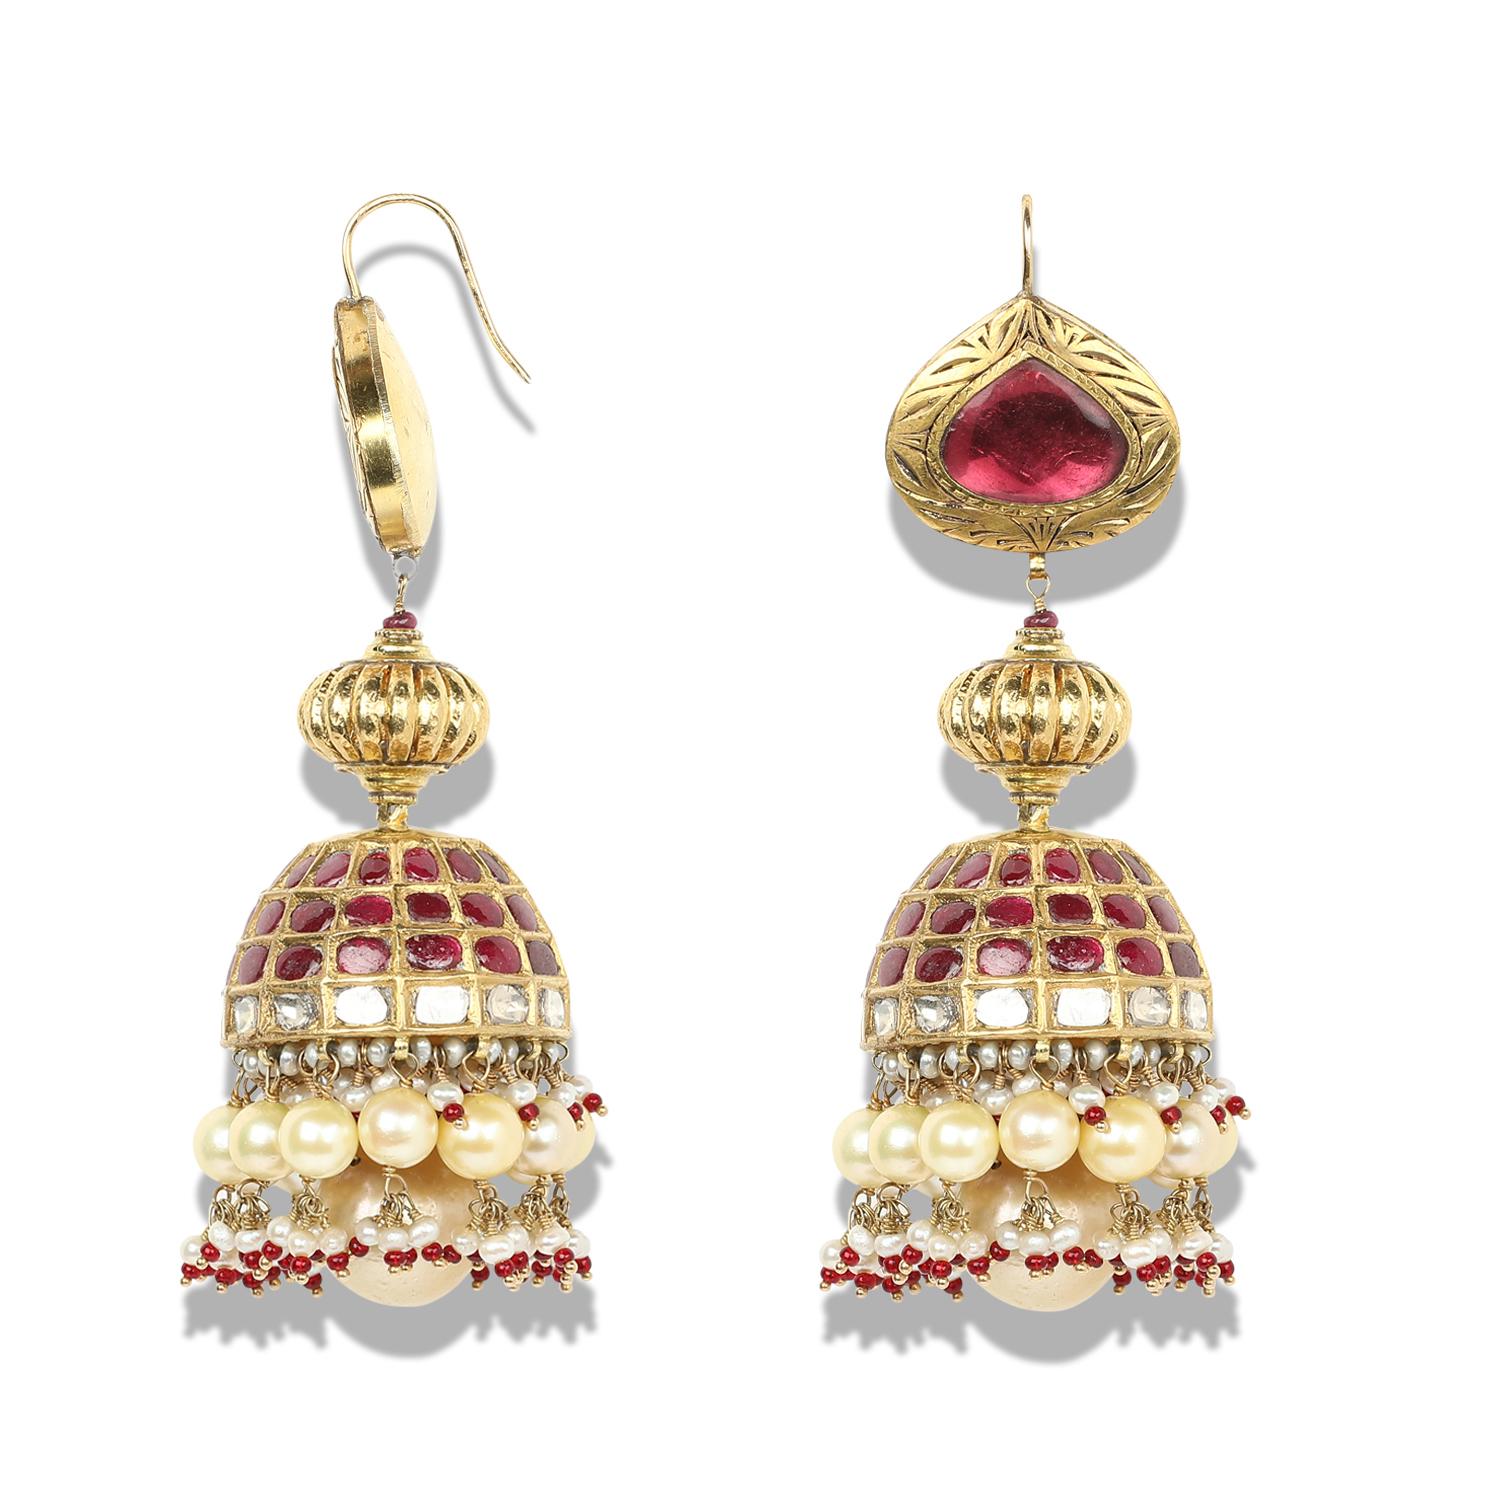 Mixed Cut Lal pari jhumkas with rubies, pearls and polki by Vintage intention For Sale